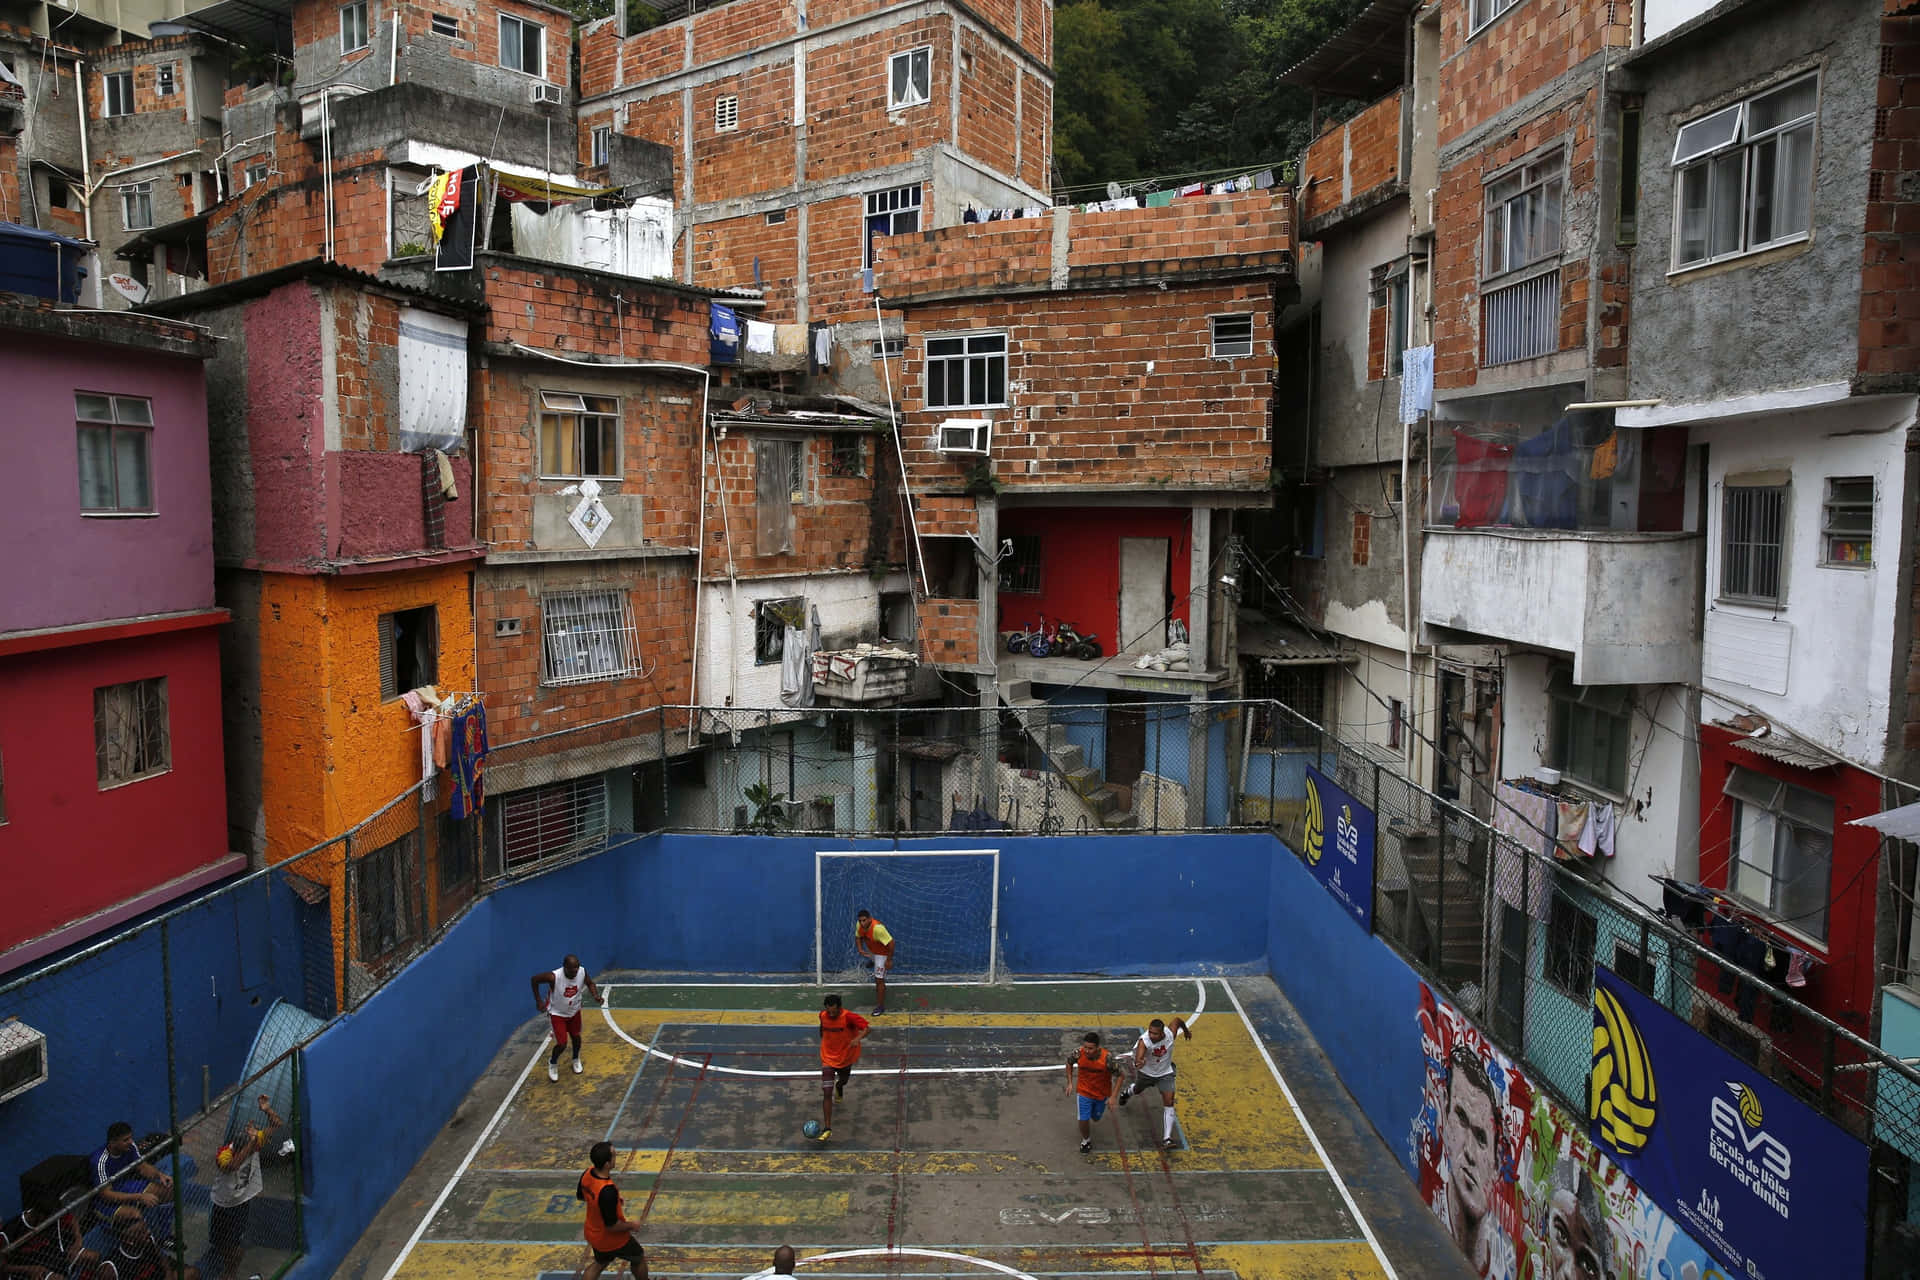 Caption: A Dynamic Game Of Street Soccer Wallpaper